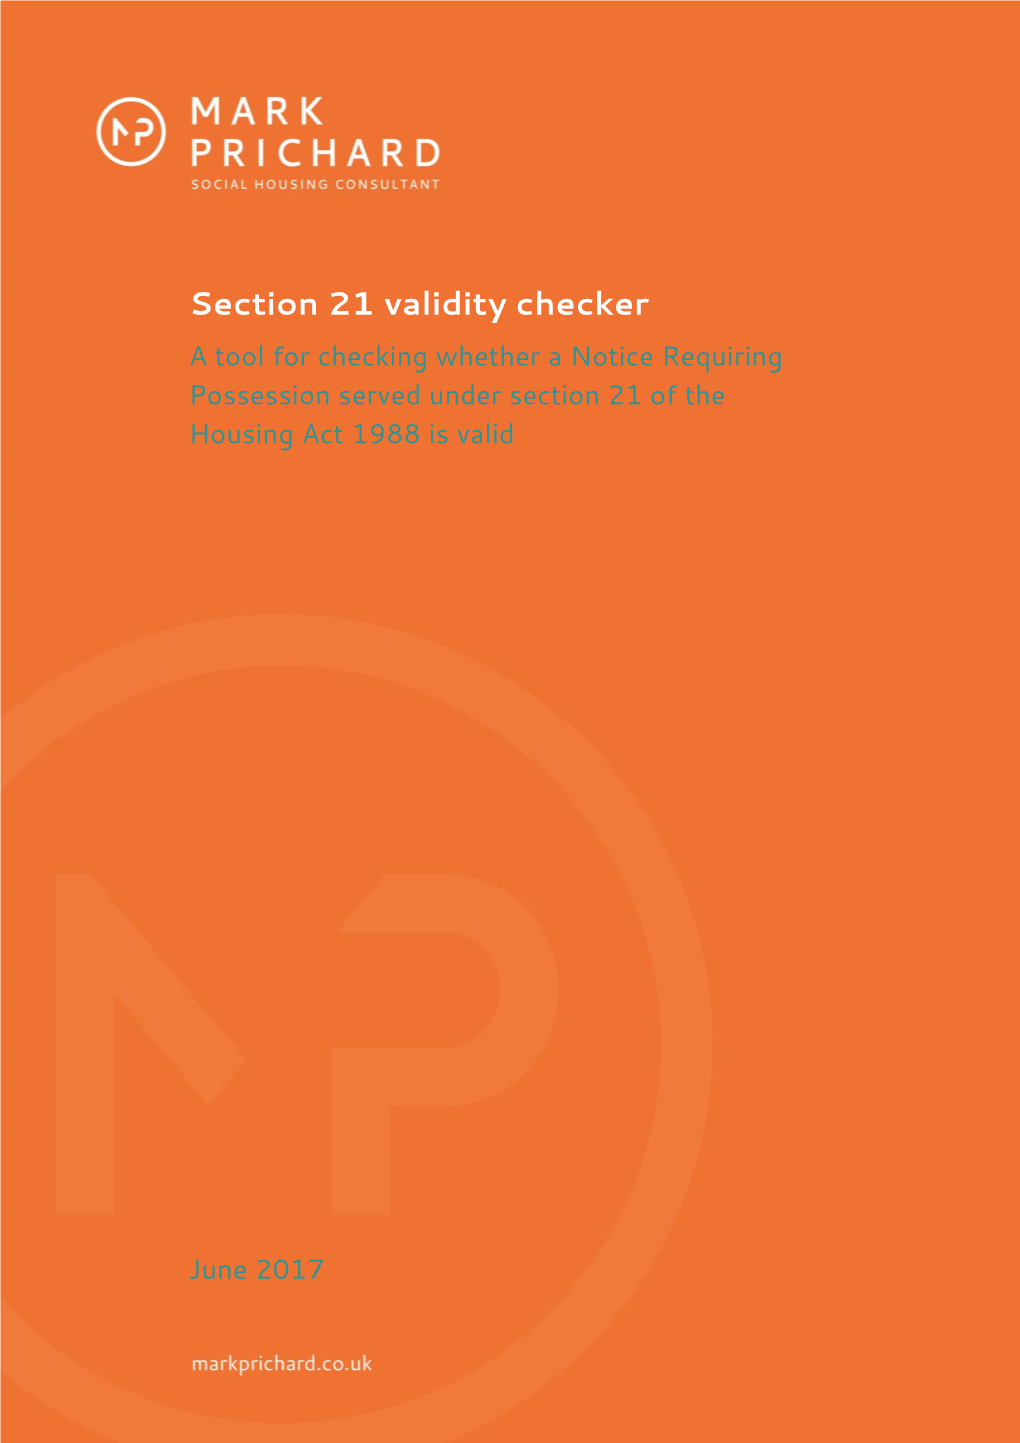 Section 21 Validity Checker a Tool for Checking Whether a Notice Requiring Possession Served Under Section 21 of the Housing Act 1988 Is Valid